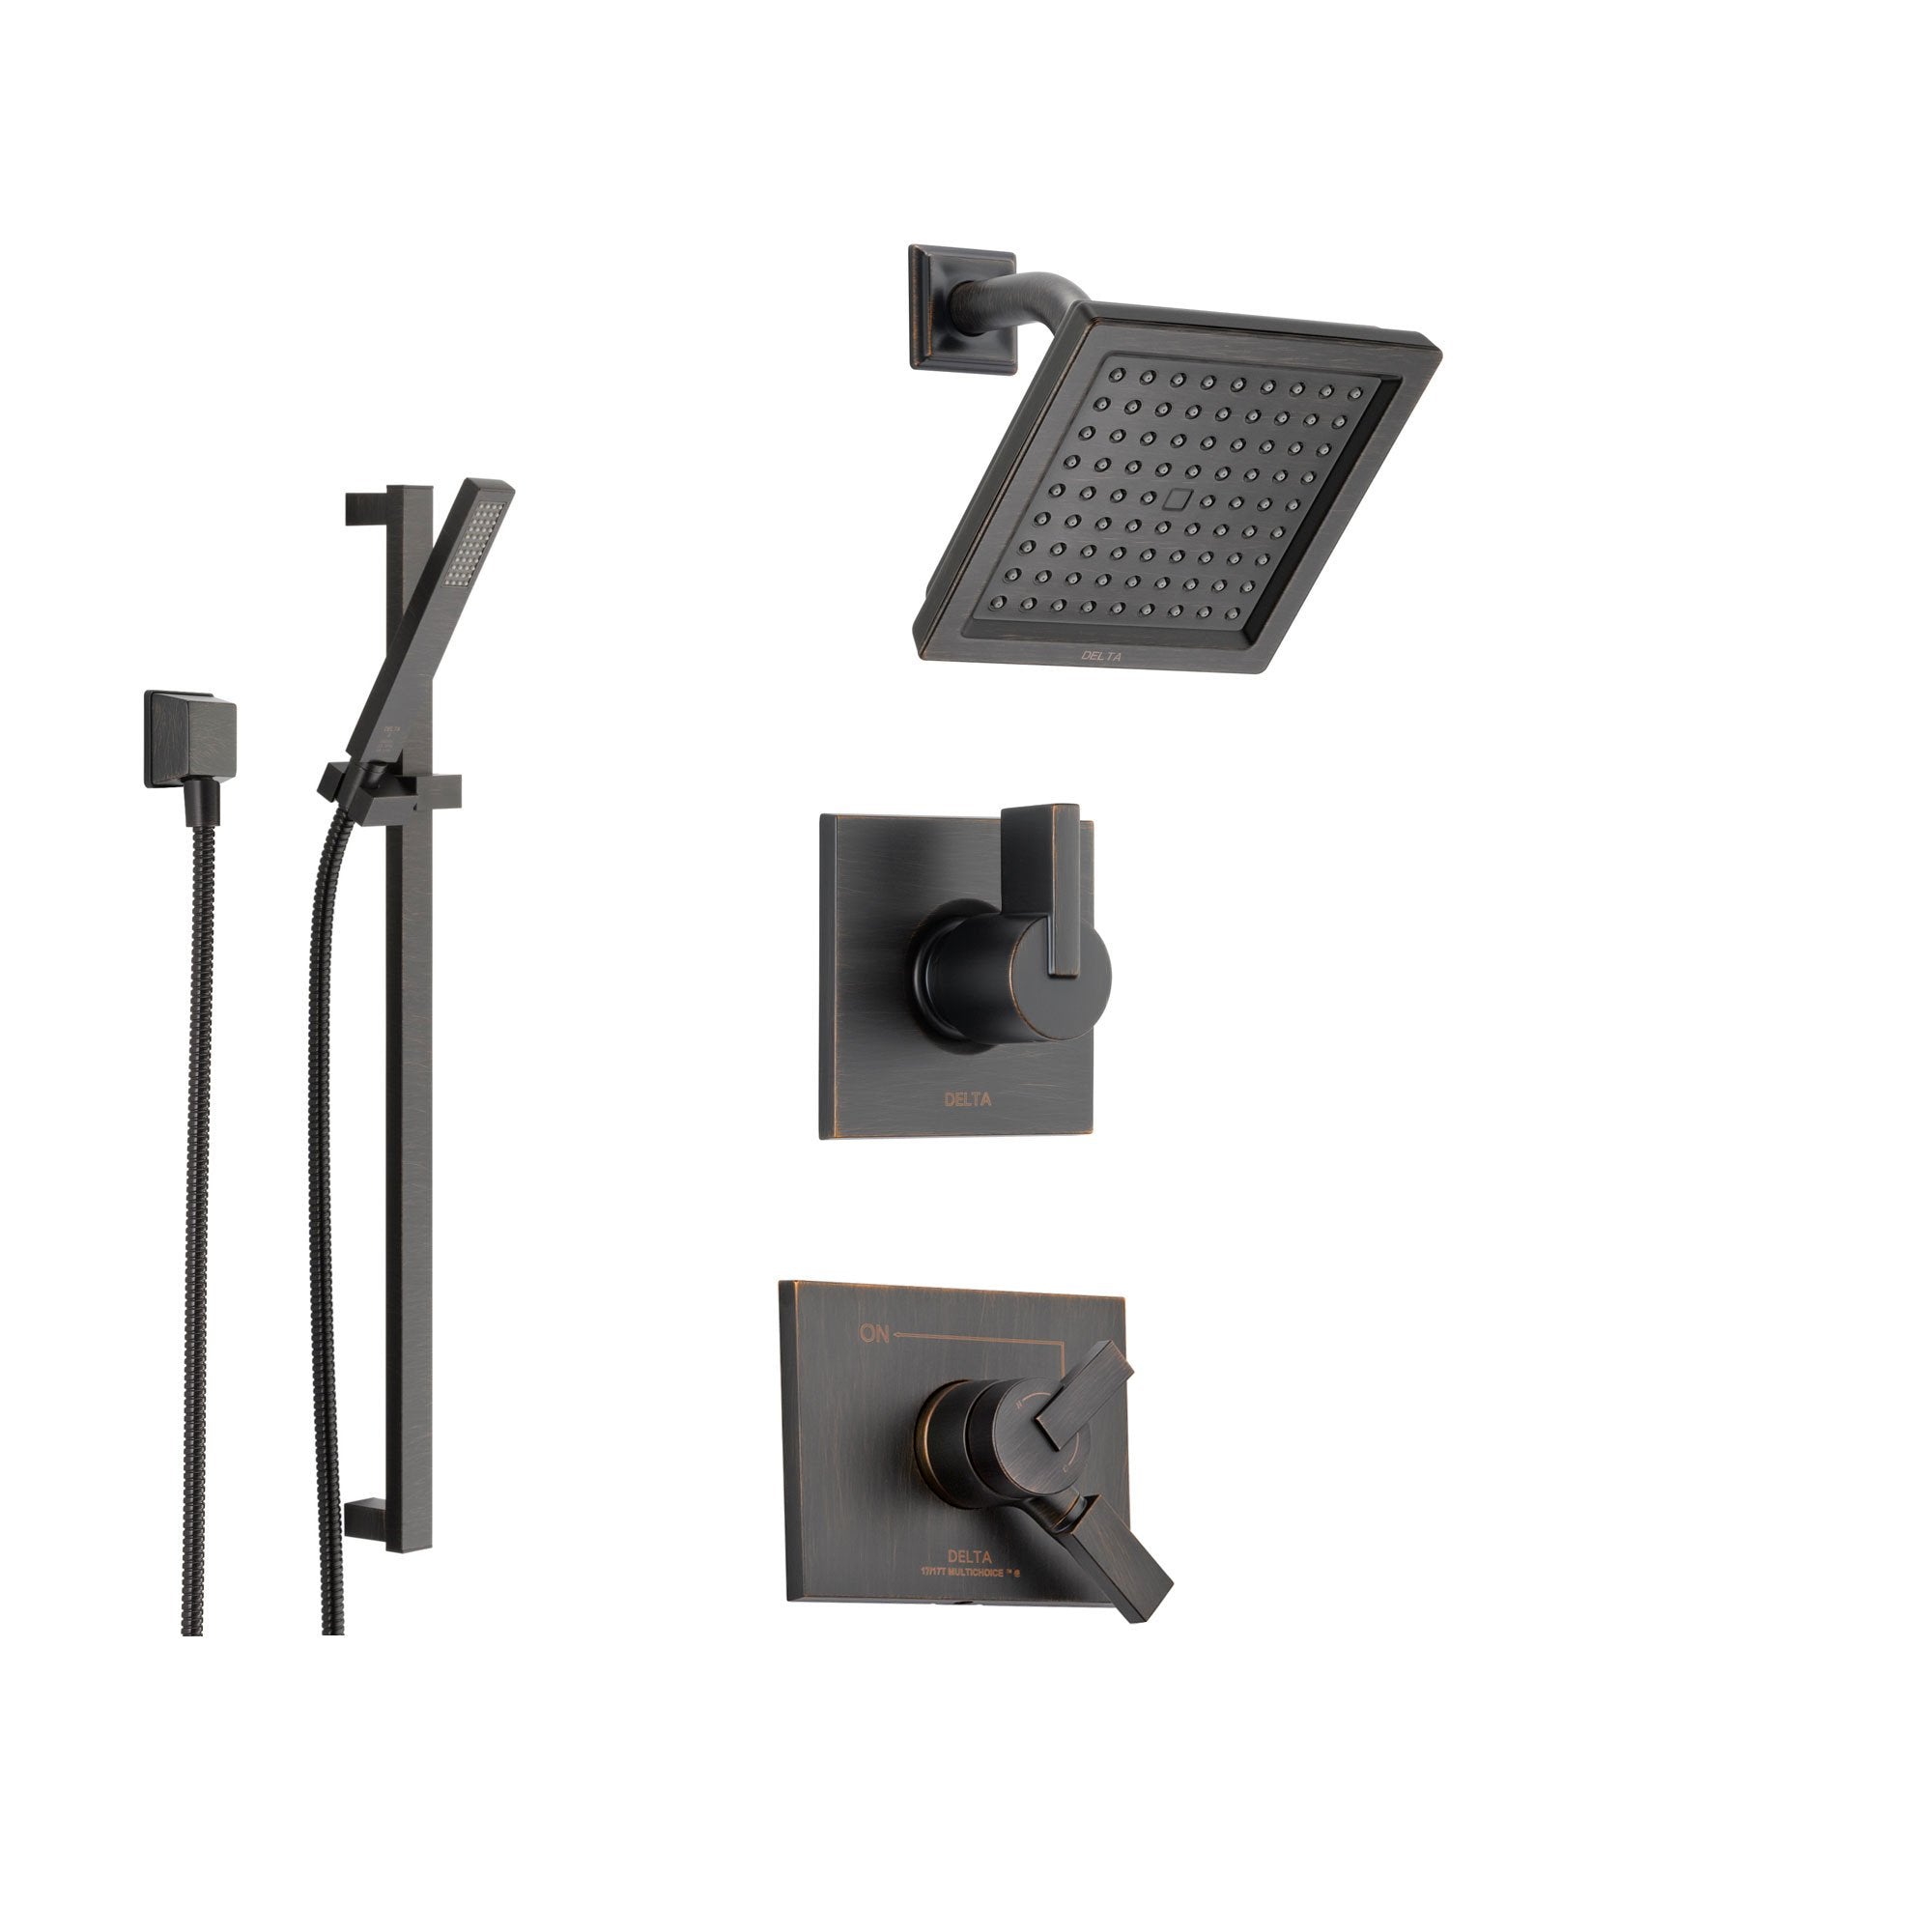 Delta Vero Venetian Bronze Shower System with Dual Control Shower Handle, 3-setting Diverter, Modern Square Showerhead, and Handheld Shower SS175385RB